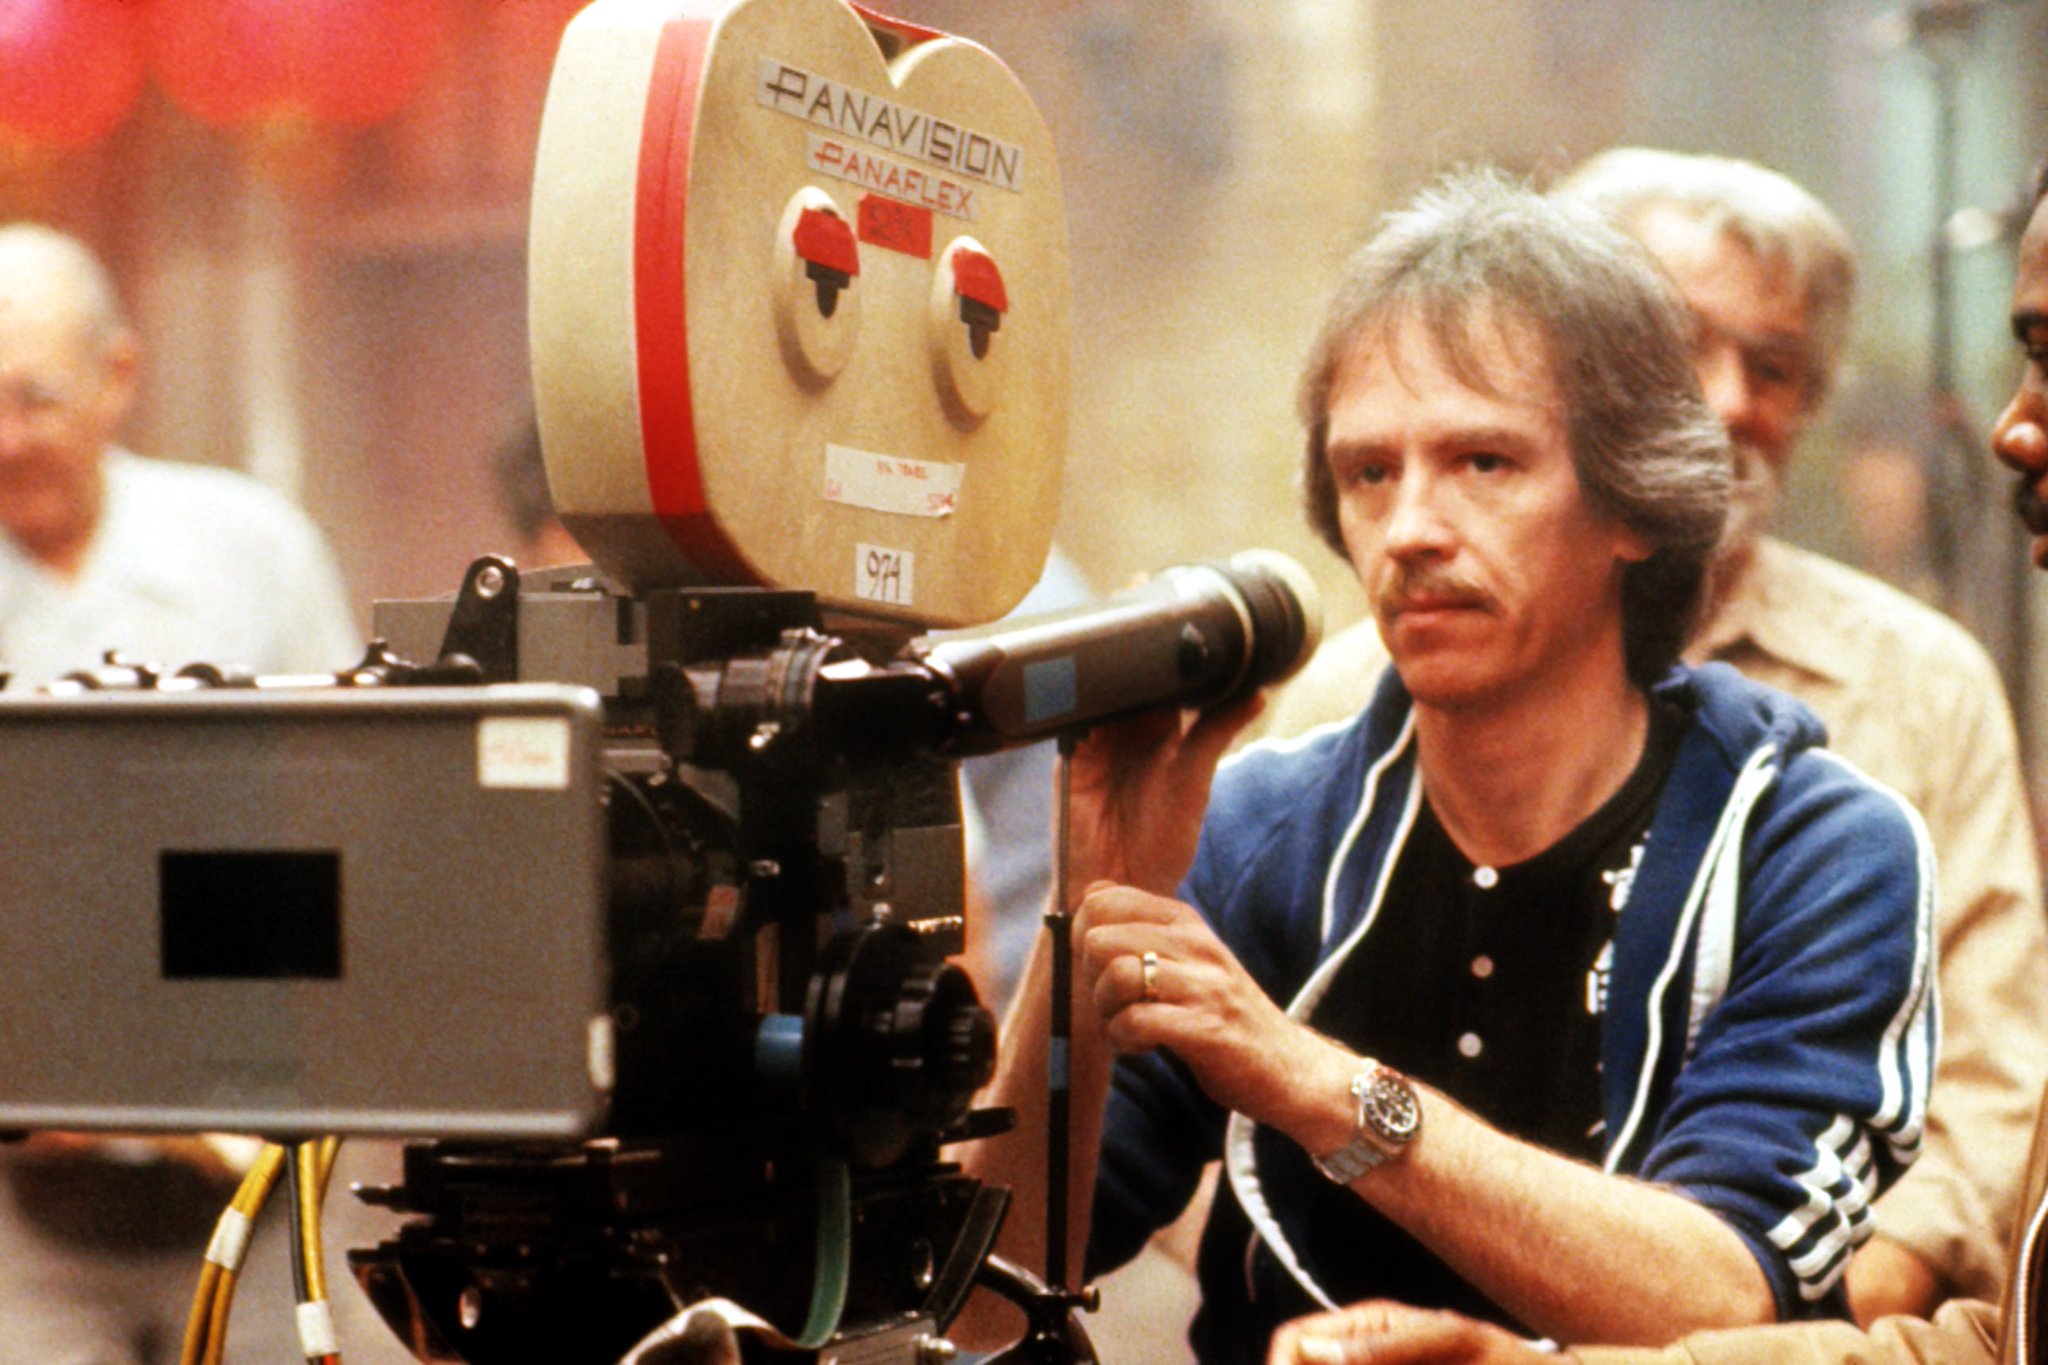 Sorry for the mix up earlier, the fog was heavy this morning. Happy 70th birthday John Carpenter! 